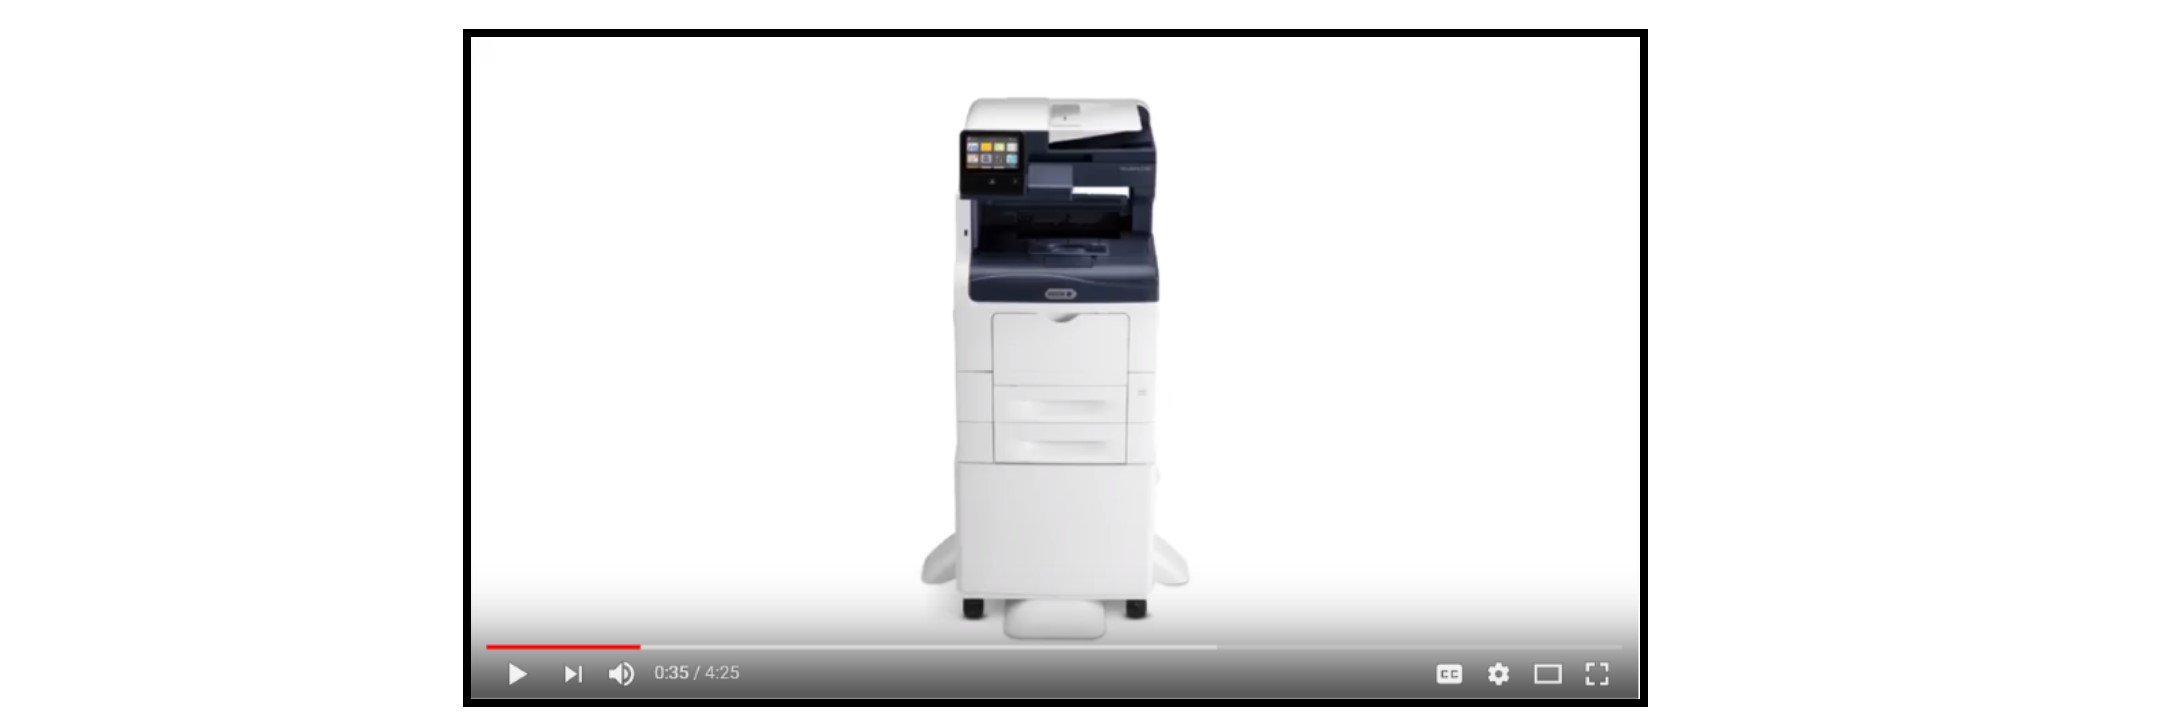 Brand New Xerox Product Videos - Just·Tech